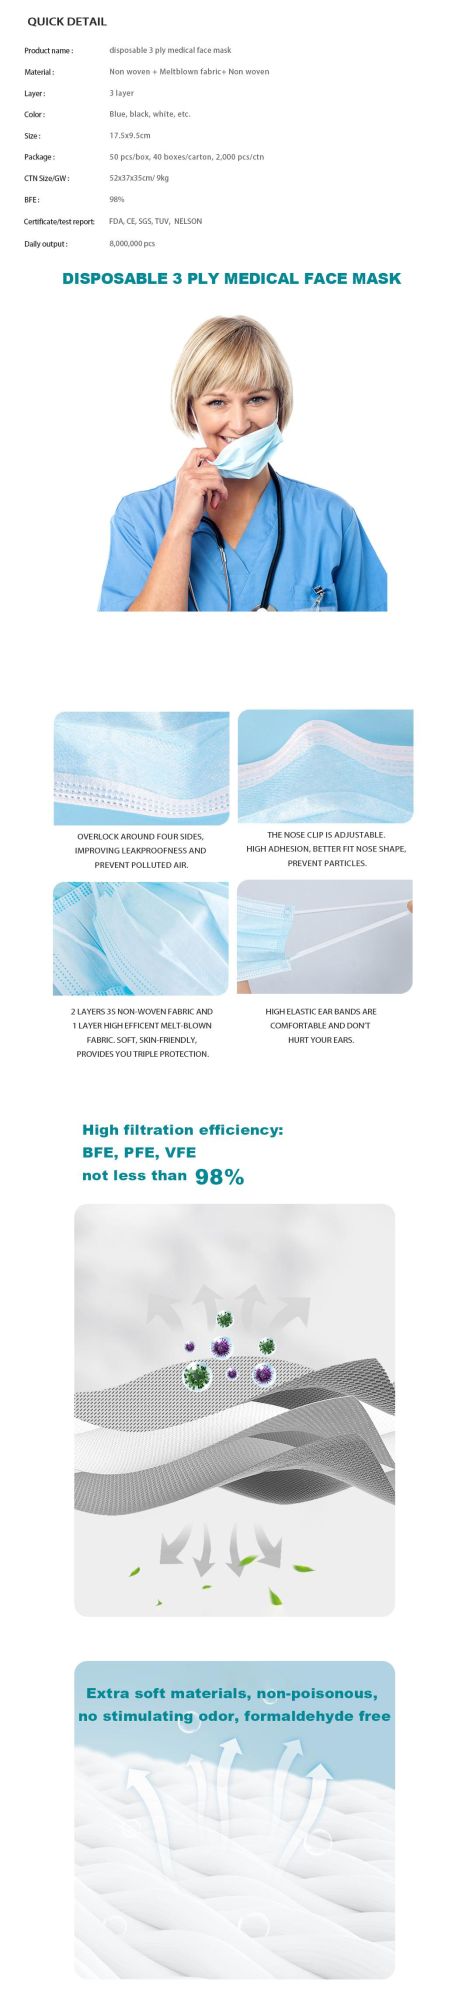 Full Test Report Great Fit Disposable Coveru Mask 3 Ply High Permeability Anti Bacteria High-Quality Medical Mask